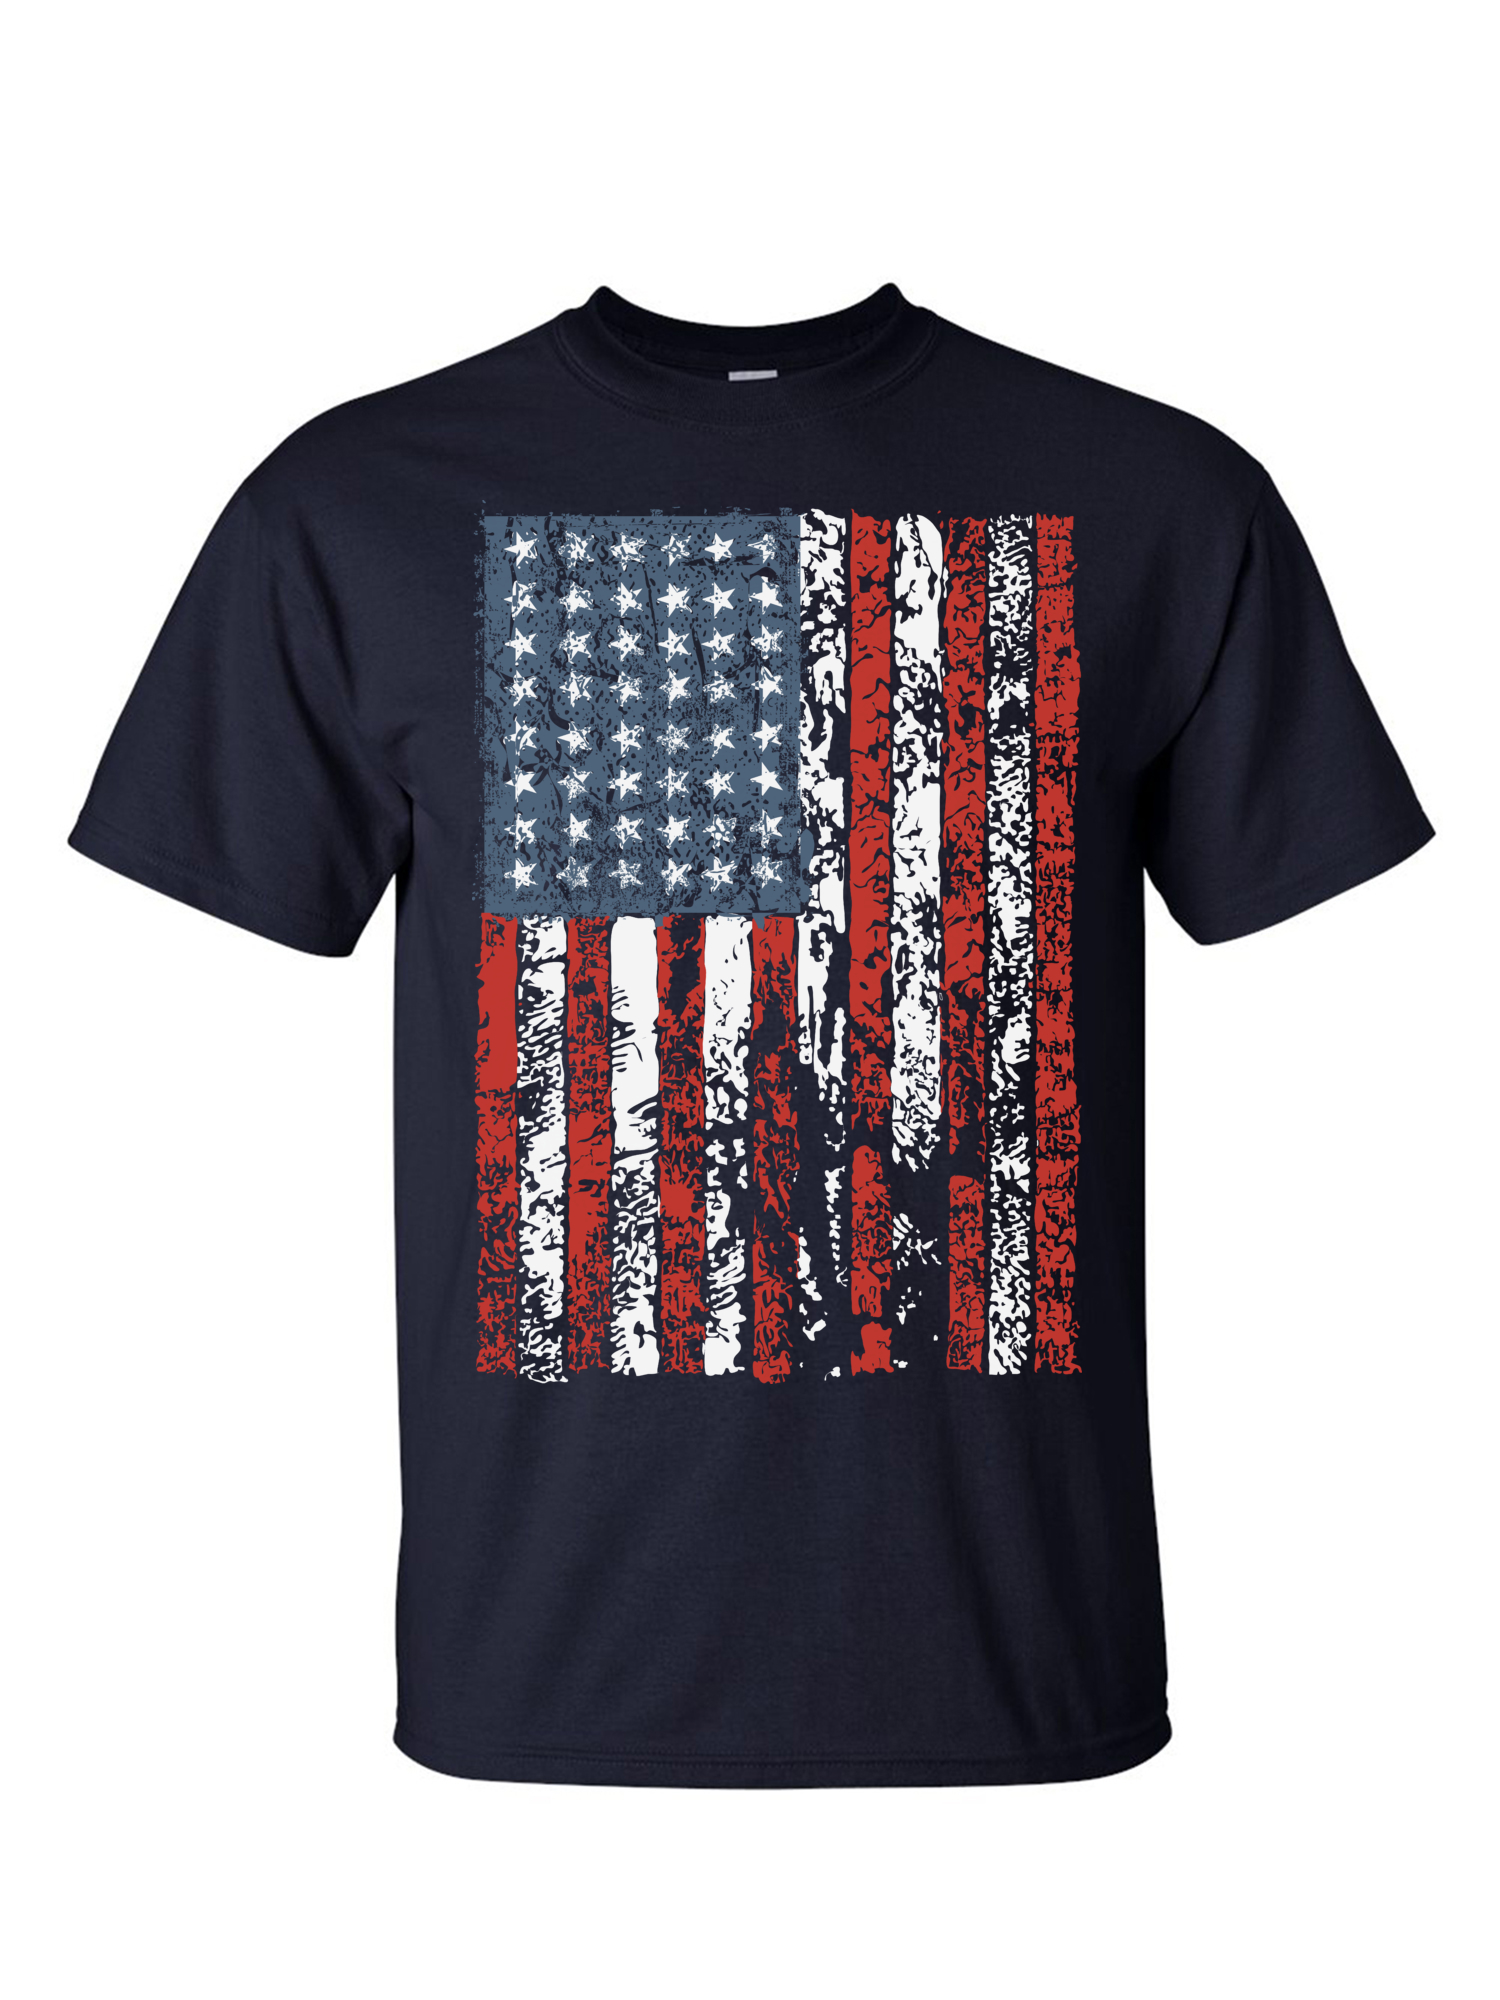 Funny Mens Animal Themed Patriotic Graphic Tees for 4th of July and Summer